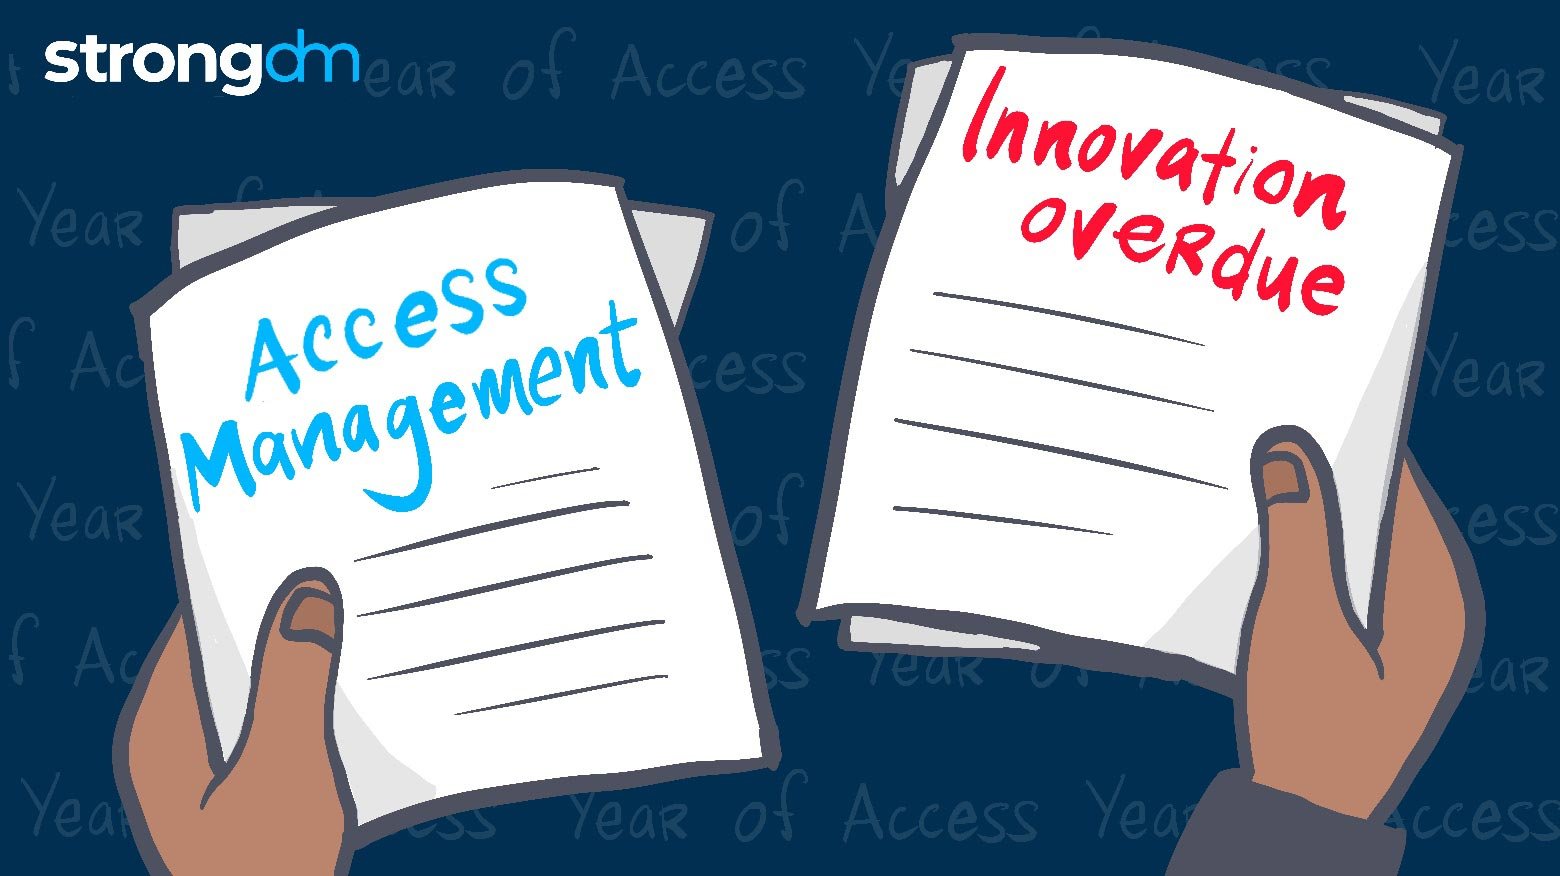 Why Access Management Is Overdue for Innovation